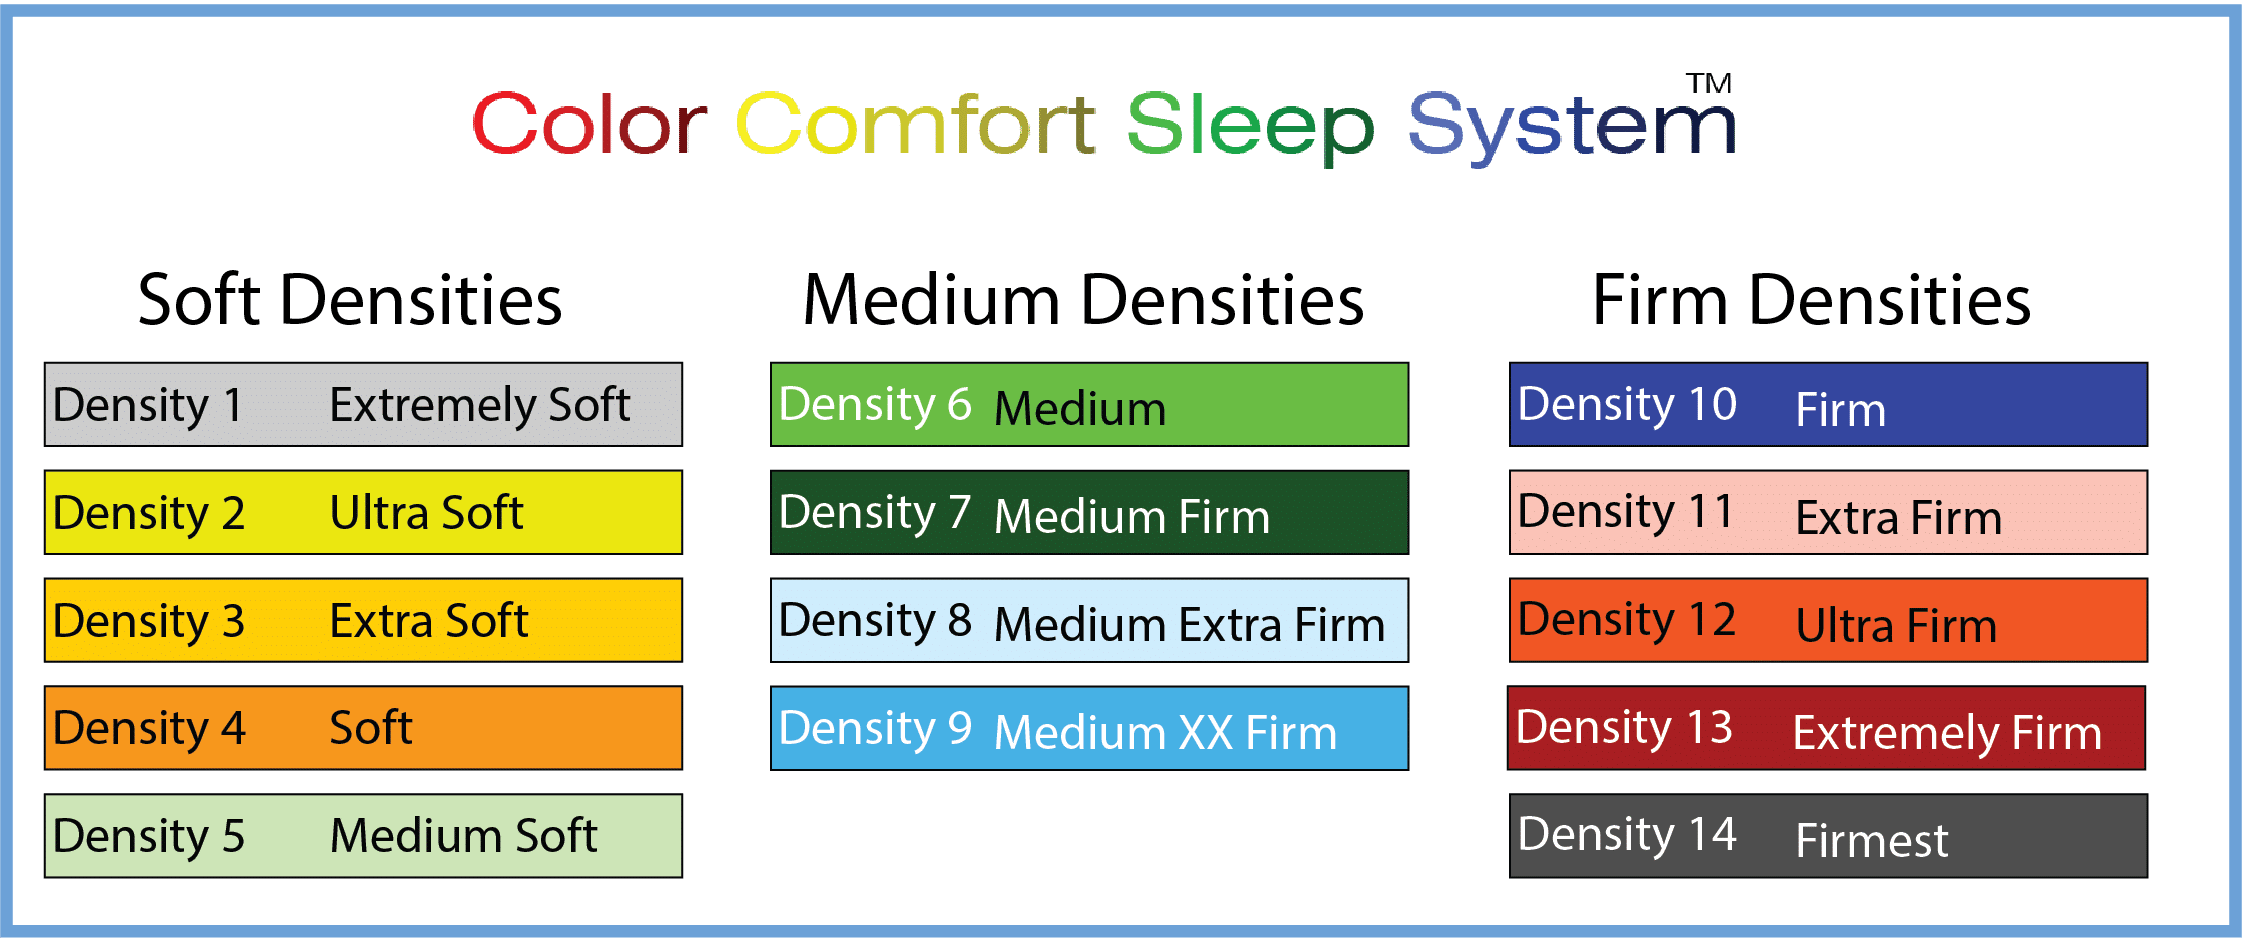 CST Color Comfort Sleep System